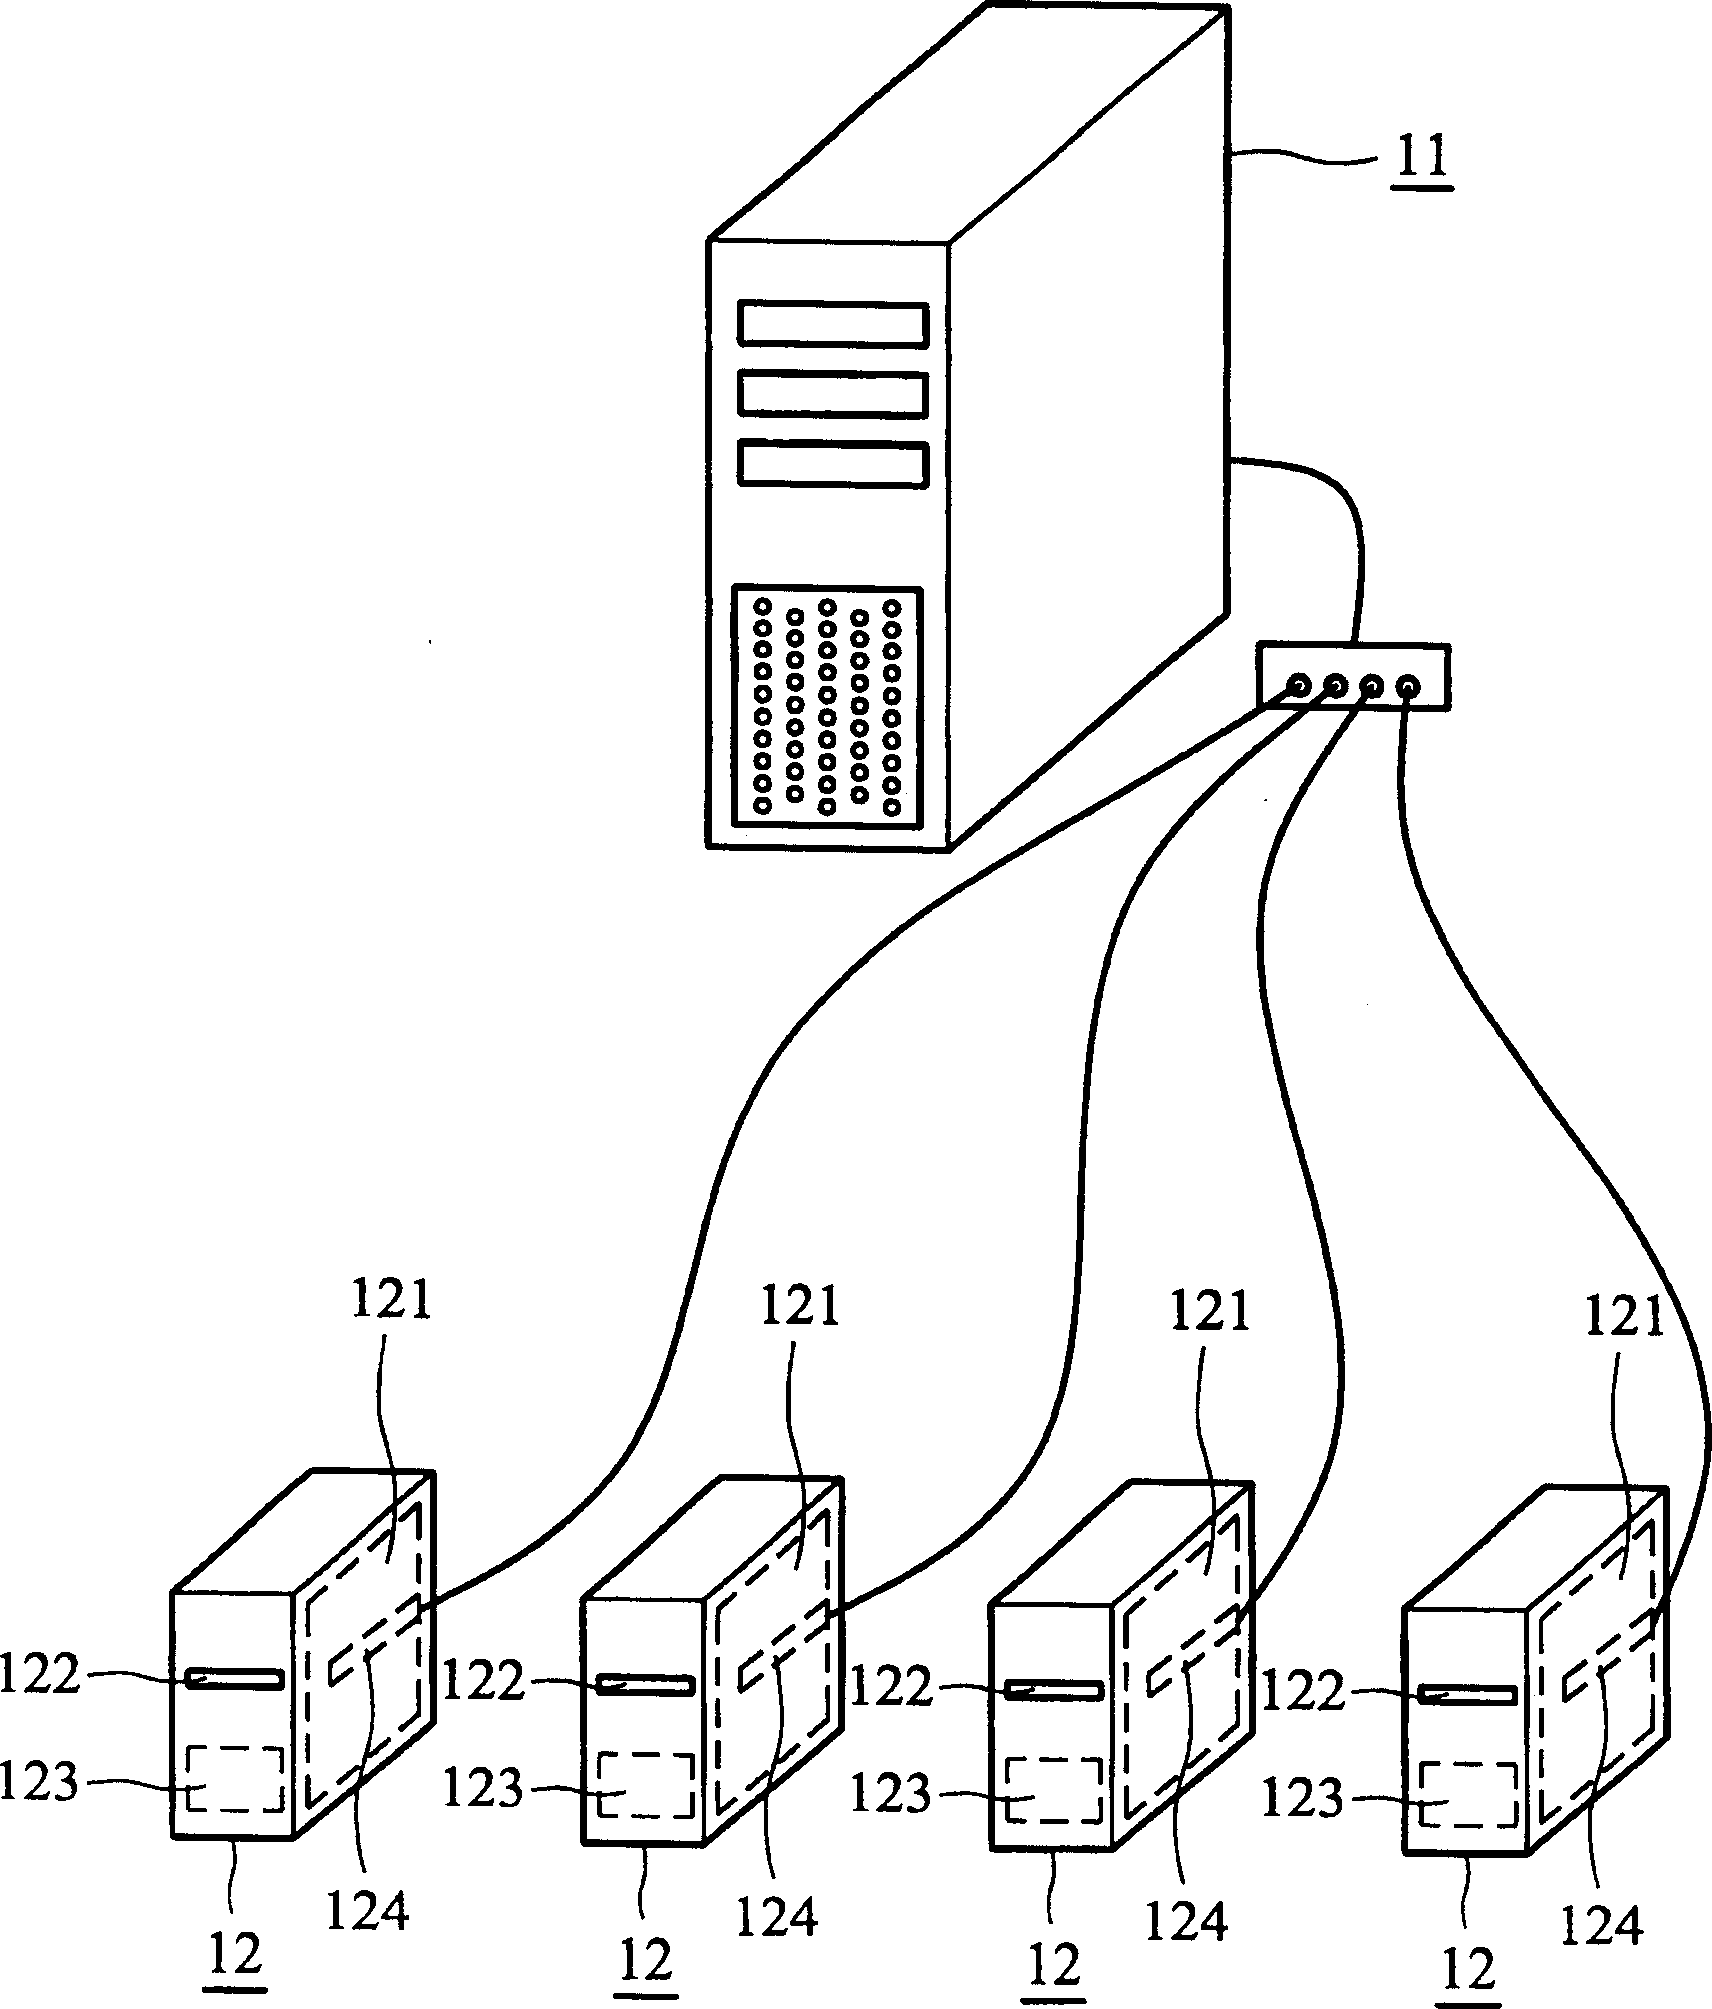 Automatic main board test system and methods